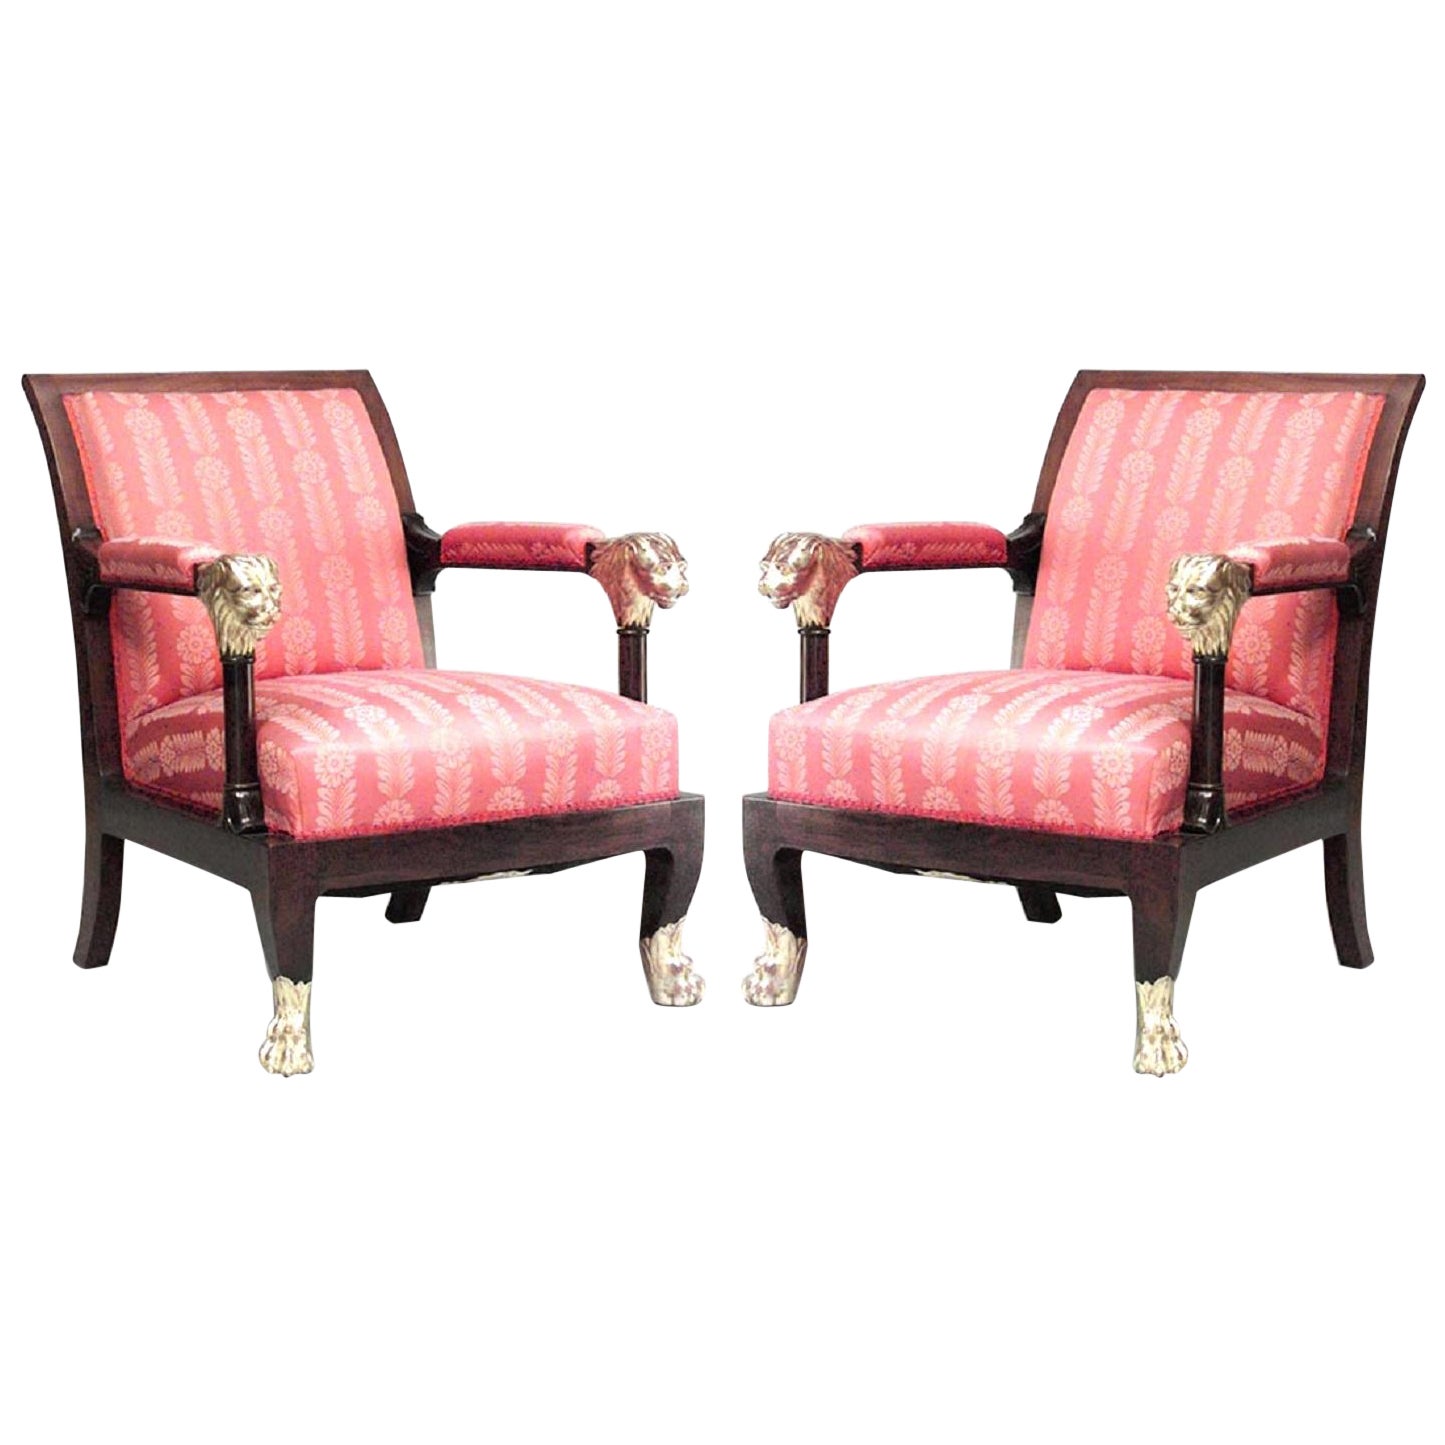 Pair of English Regency Red Armchairs